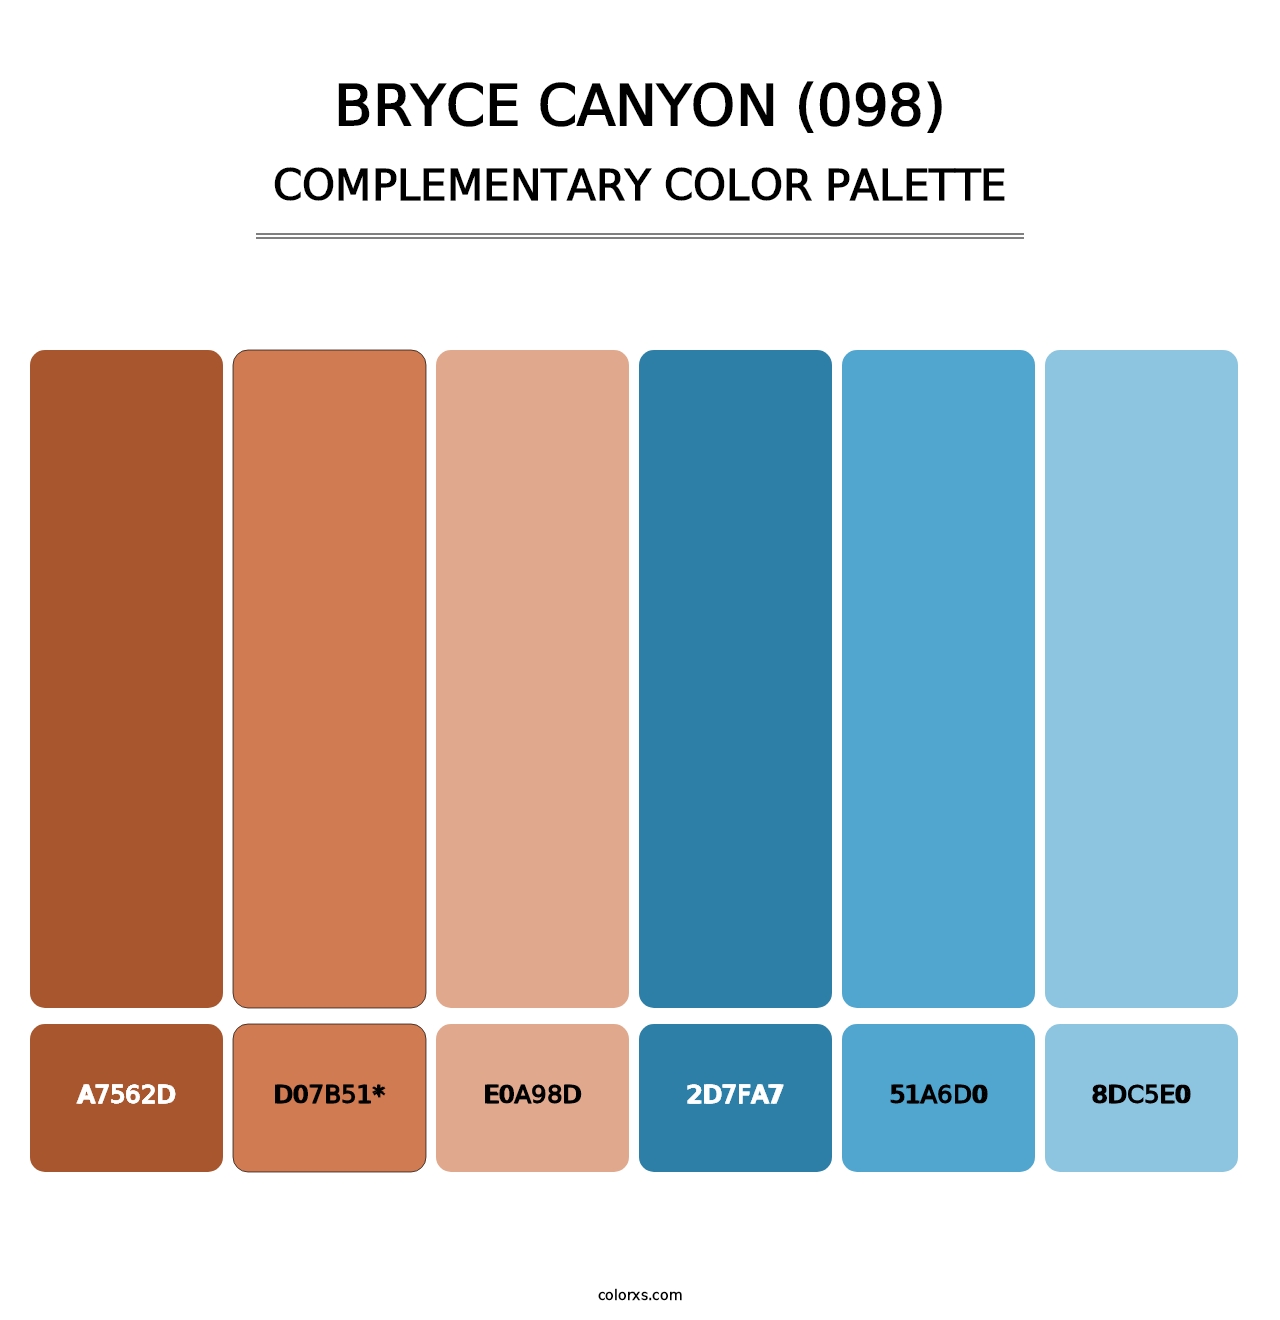 Bryce Canyon (098) - Complementary Color Palette